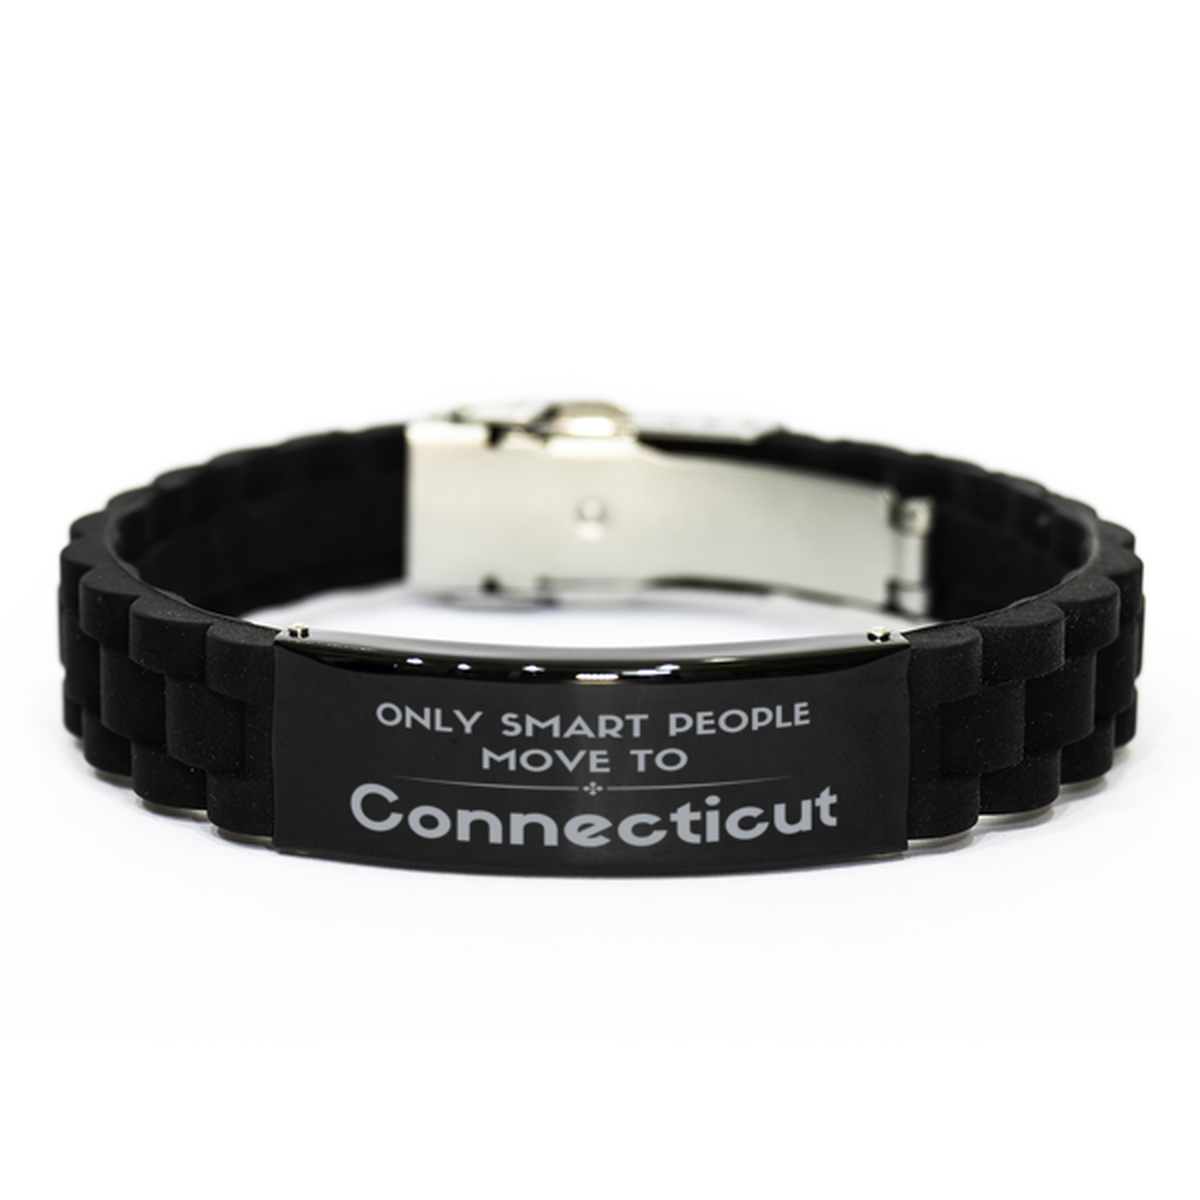 Only smart people move to Connecticut Black Glidelock Clasp Bracelet, Gag Gifts For Connecticut, Move to Connecticut Gifts for Friends Coworker Funny Saying Quote